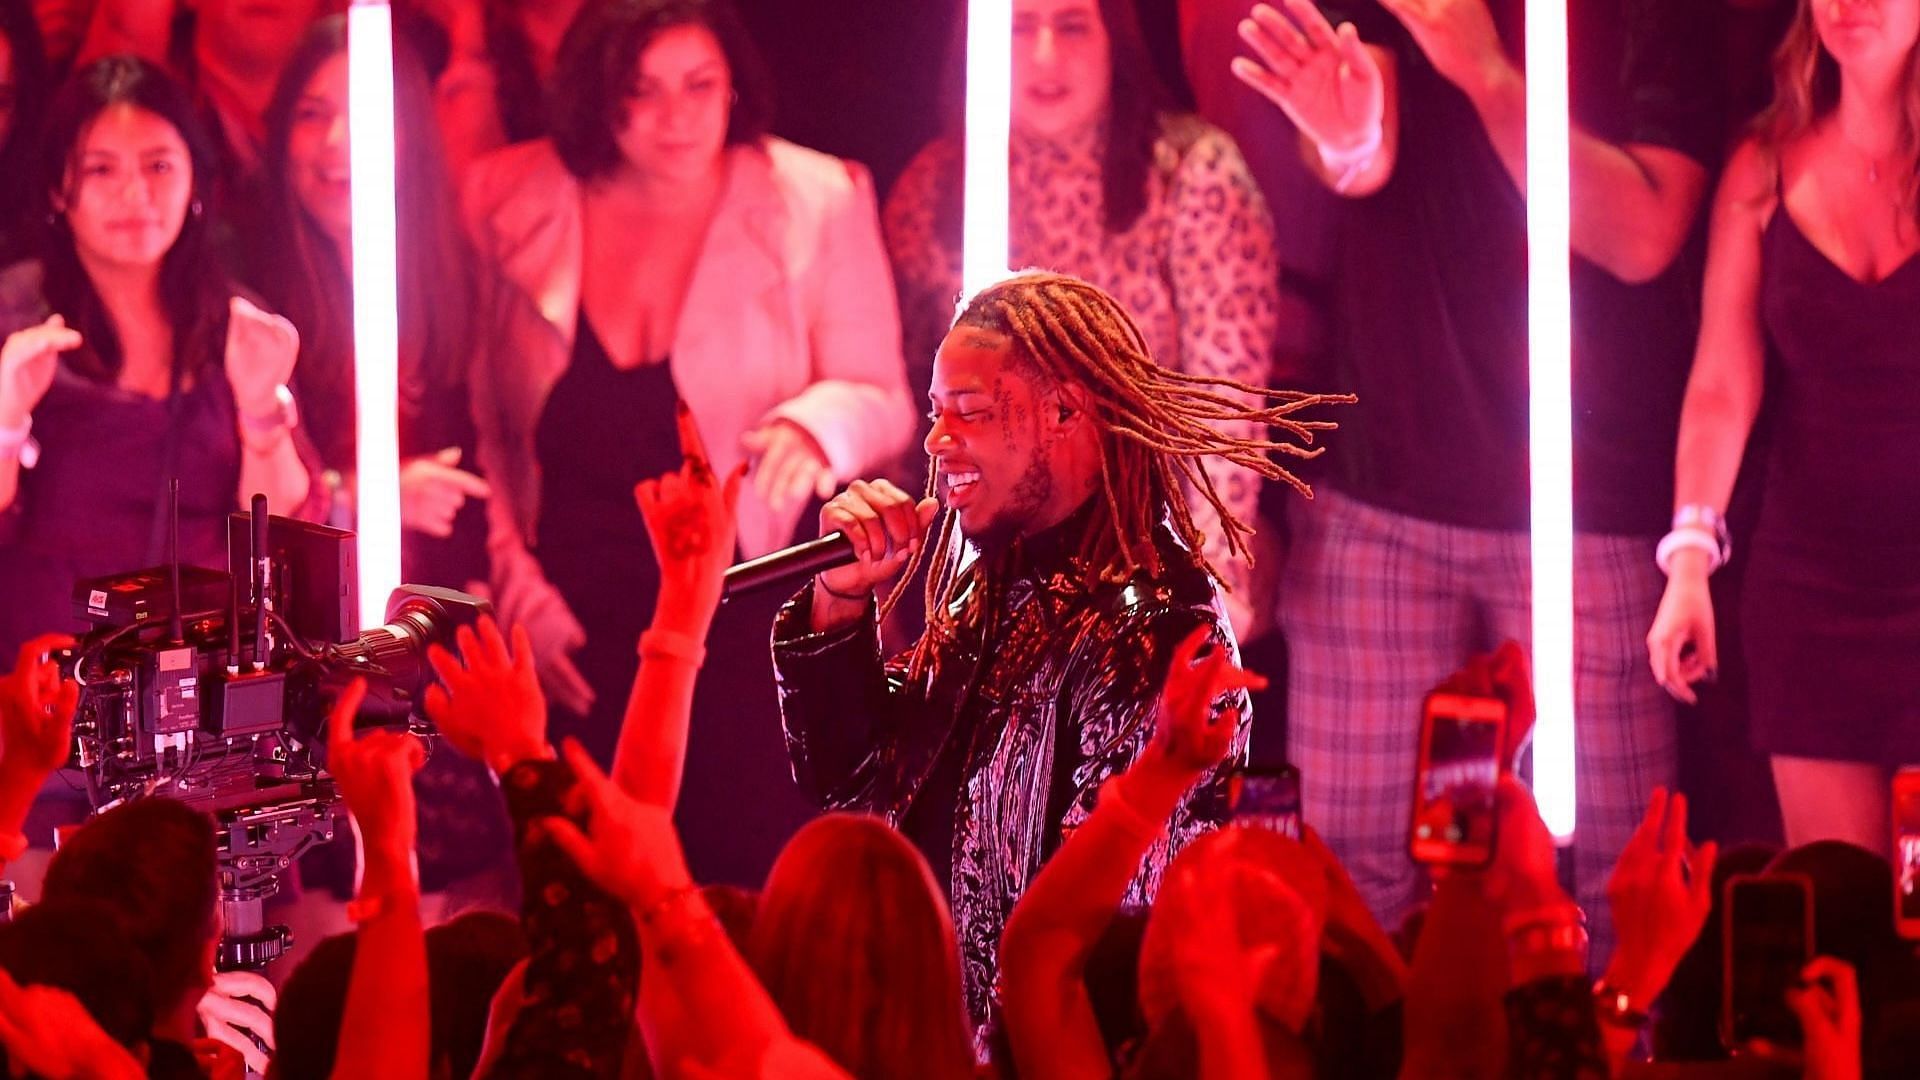 Fetty Wap performs onstage during the 2019 MTV Video Music Awards at Prudential Center on August 26, 2019, in Newark, New Jersey. (Photo by Mike Coppola/Getty Images for MTV)